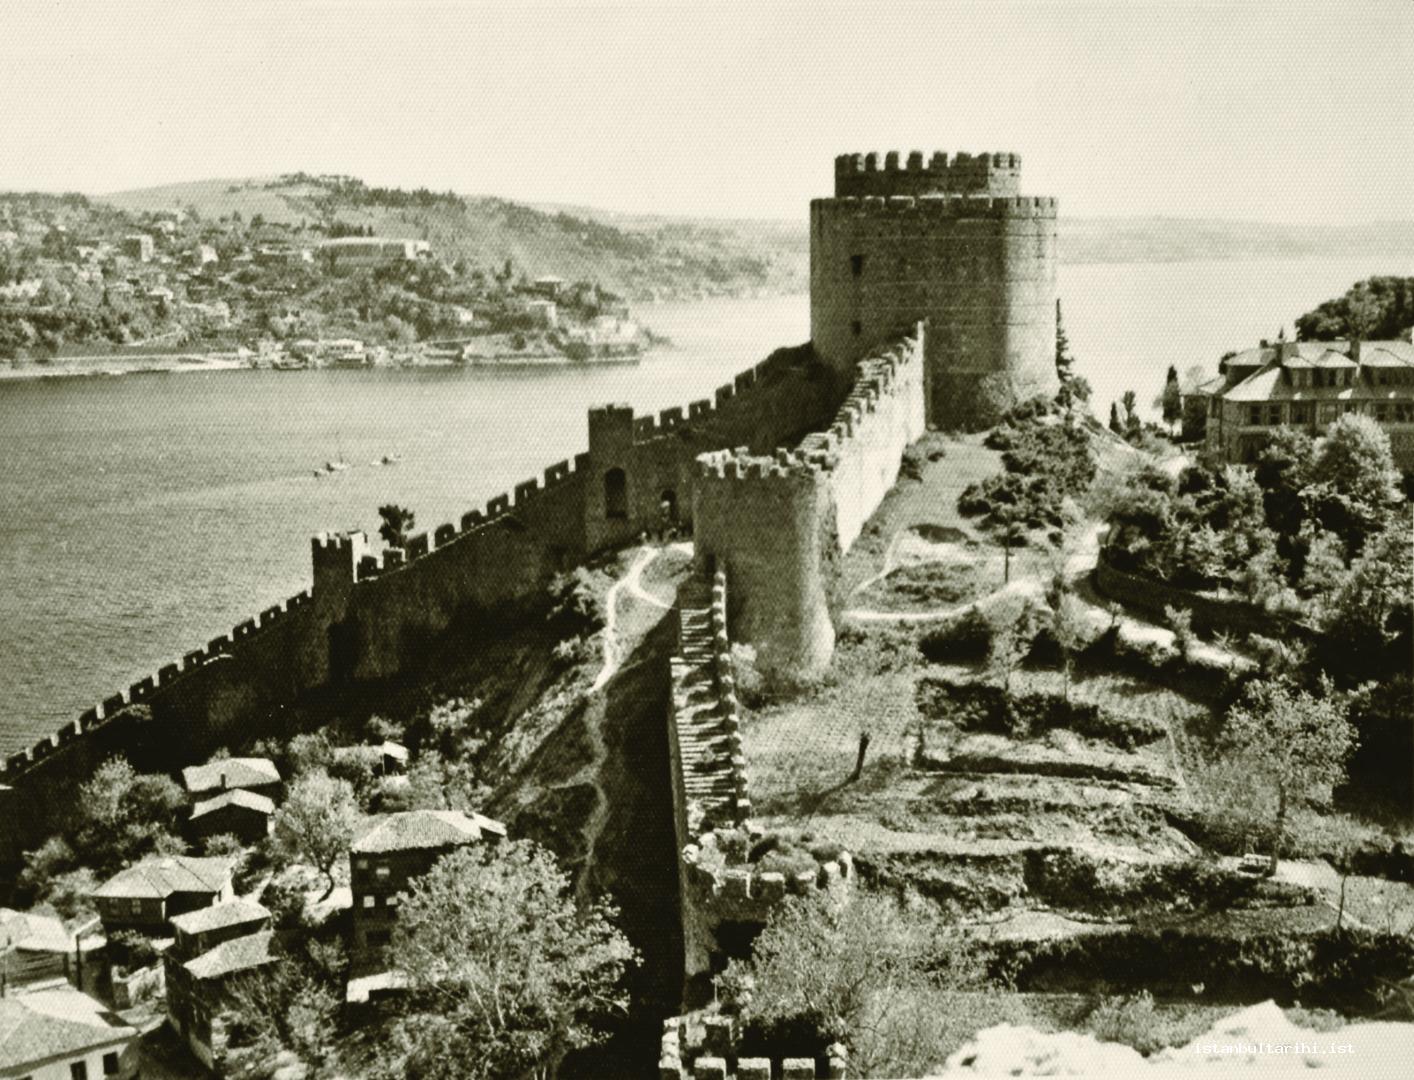 8- Rumelian castle. This magnificent structure which had been neglected for long years was restored in honor of the 500<sup>th</sup> anniversary of the conquest. During the restoration works, the neighborhood formed from wooden houses and the mosque seen in the picture were demolished and the historical character of the castle was greatly damaged.